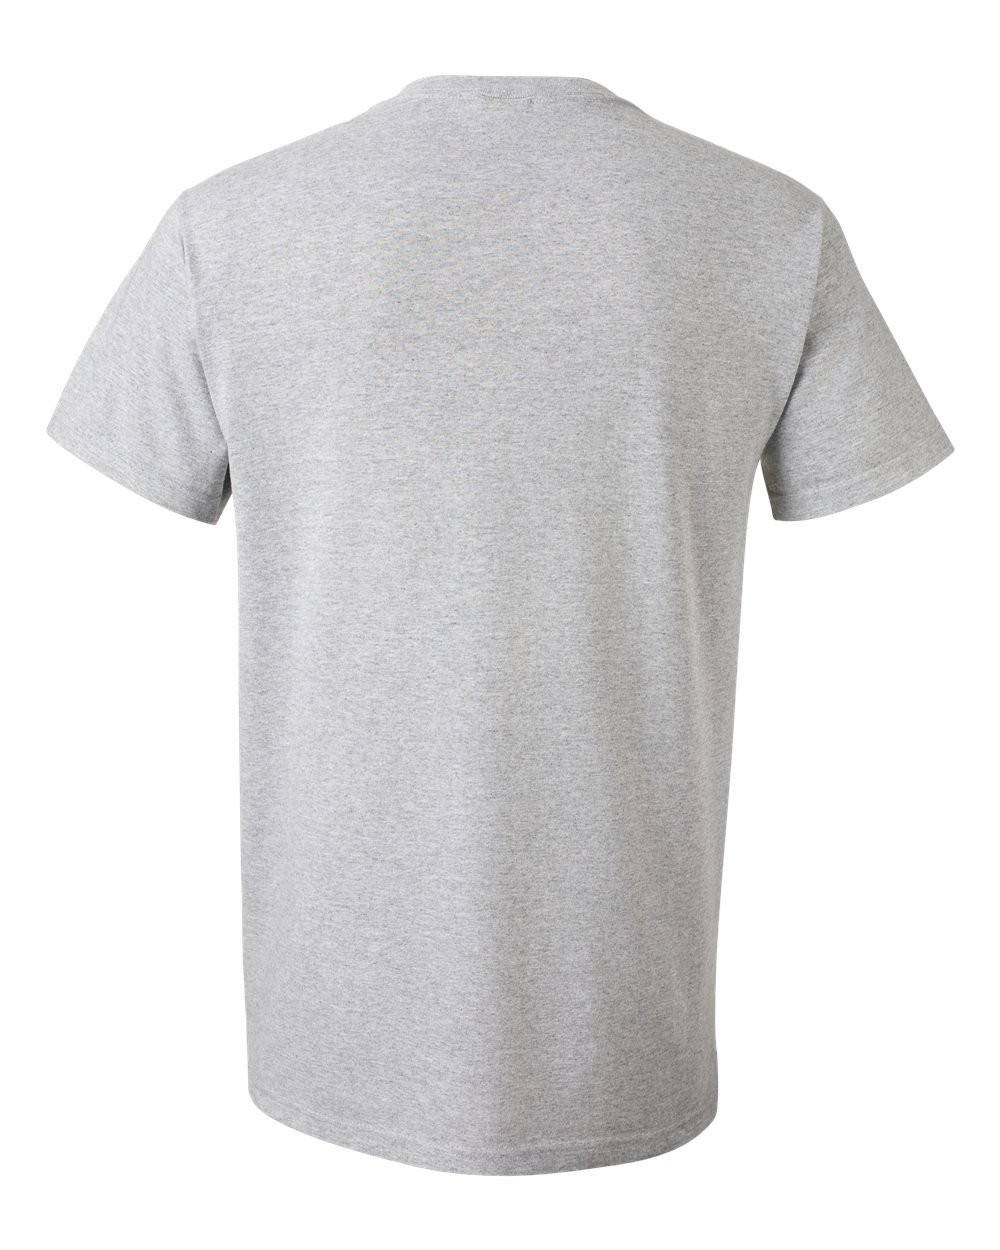 Fruit of the Loom Men's Pocket Crew Neck T-Shirt - XX-Large - Heather Gray (Pack of 4)